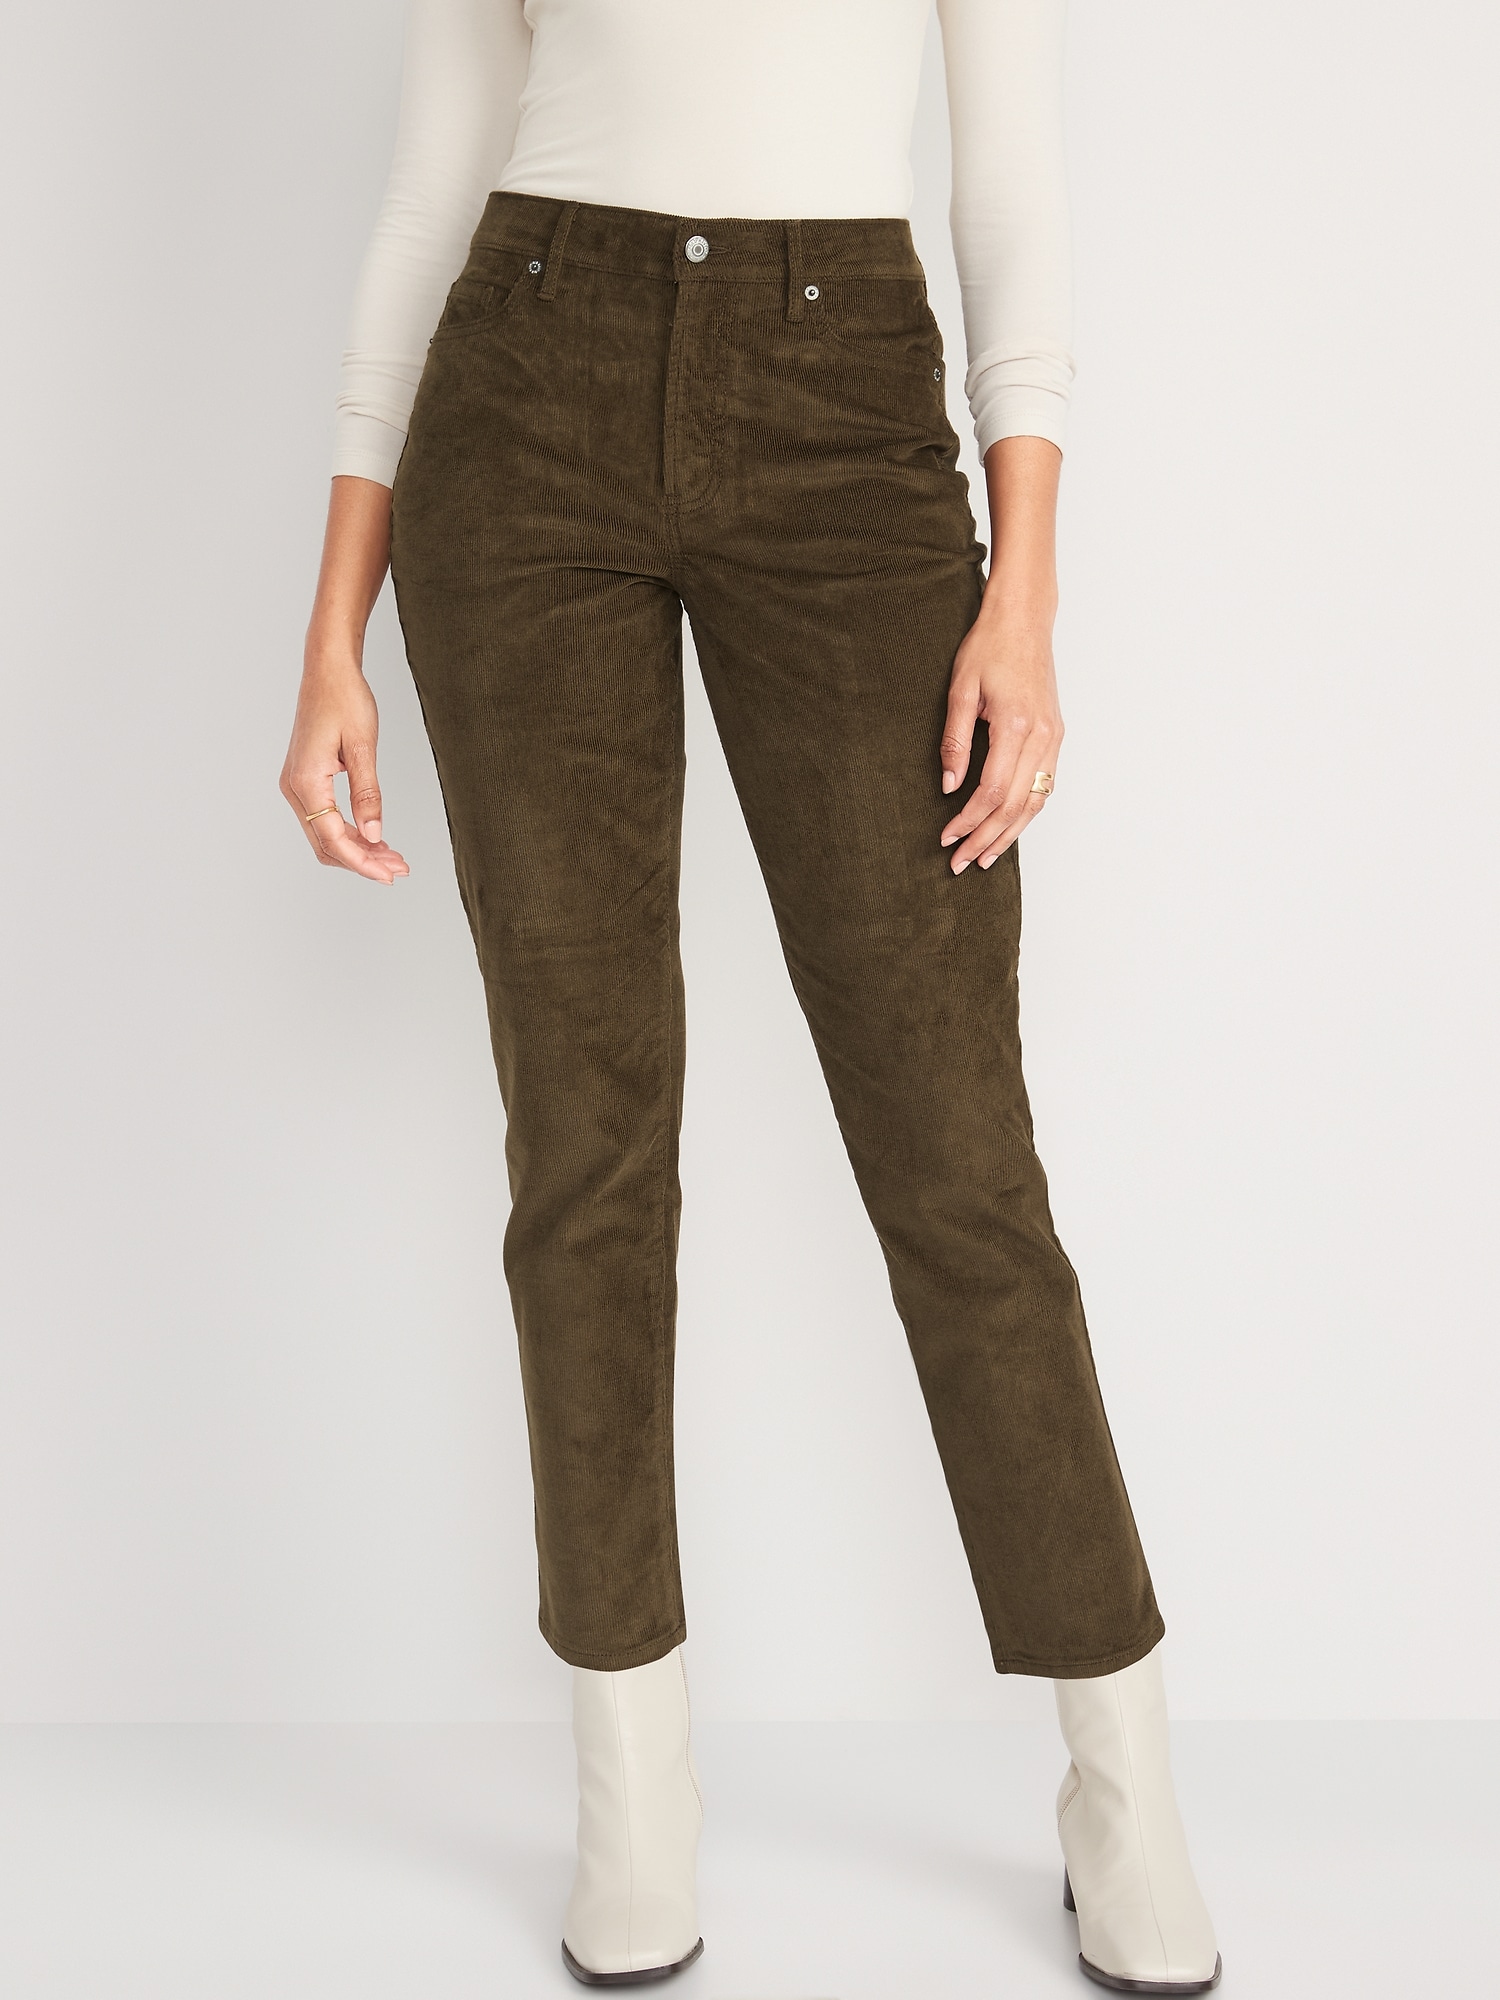 Old Navy High-Waisted OG Straight Corduroy Ankle Pants for Women green. 1